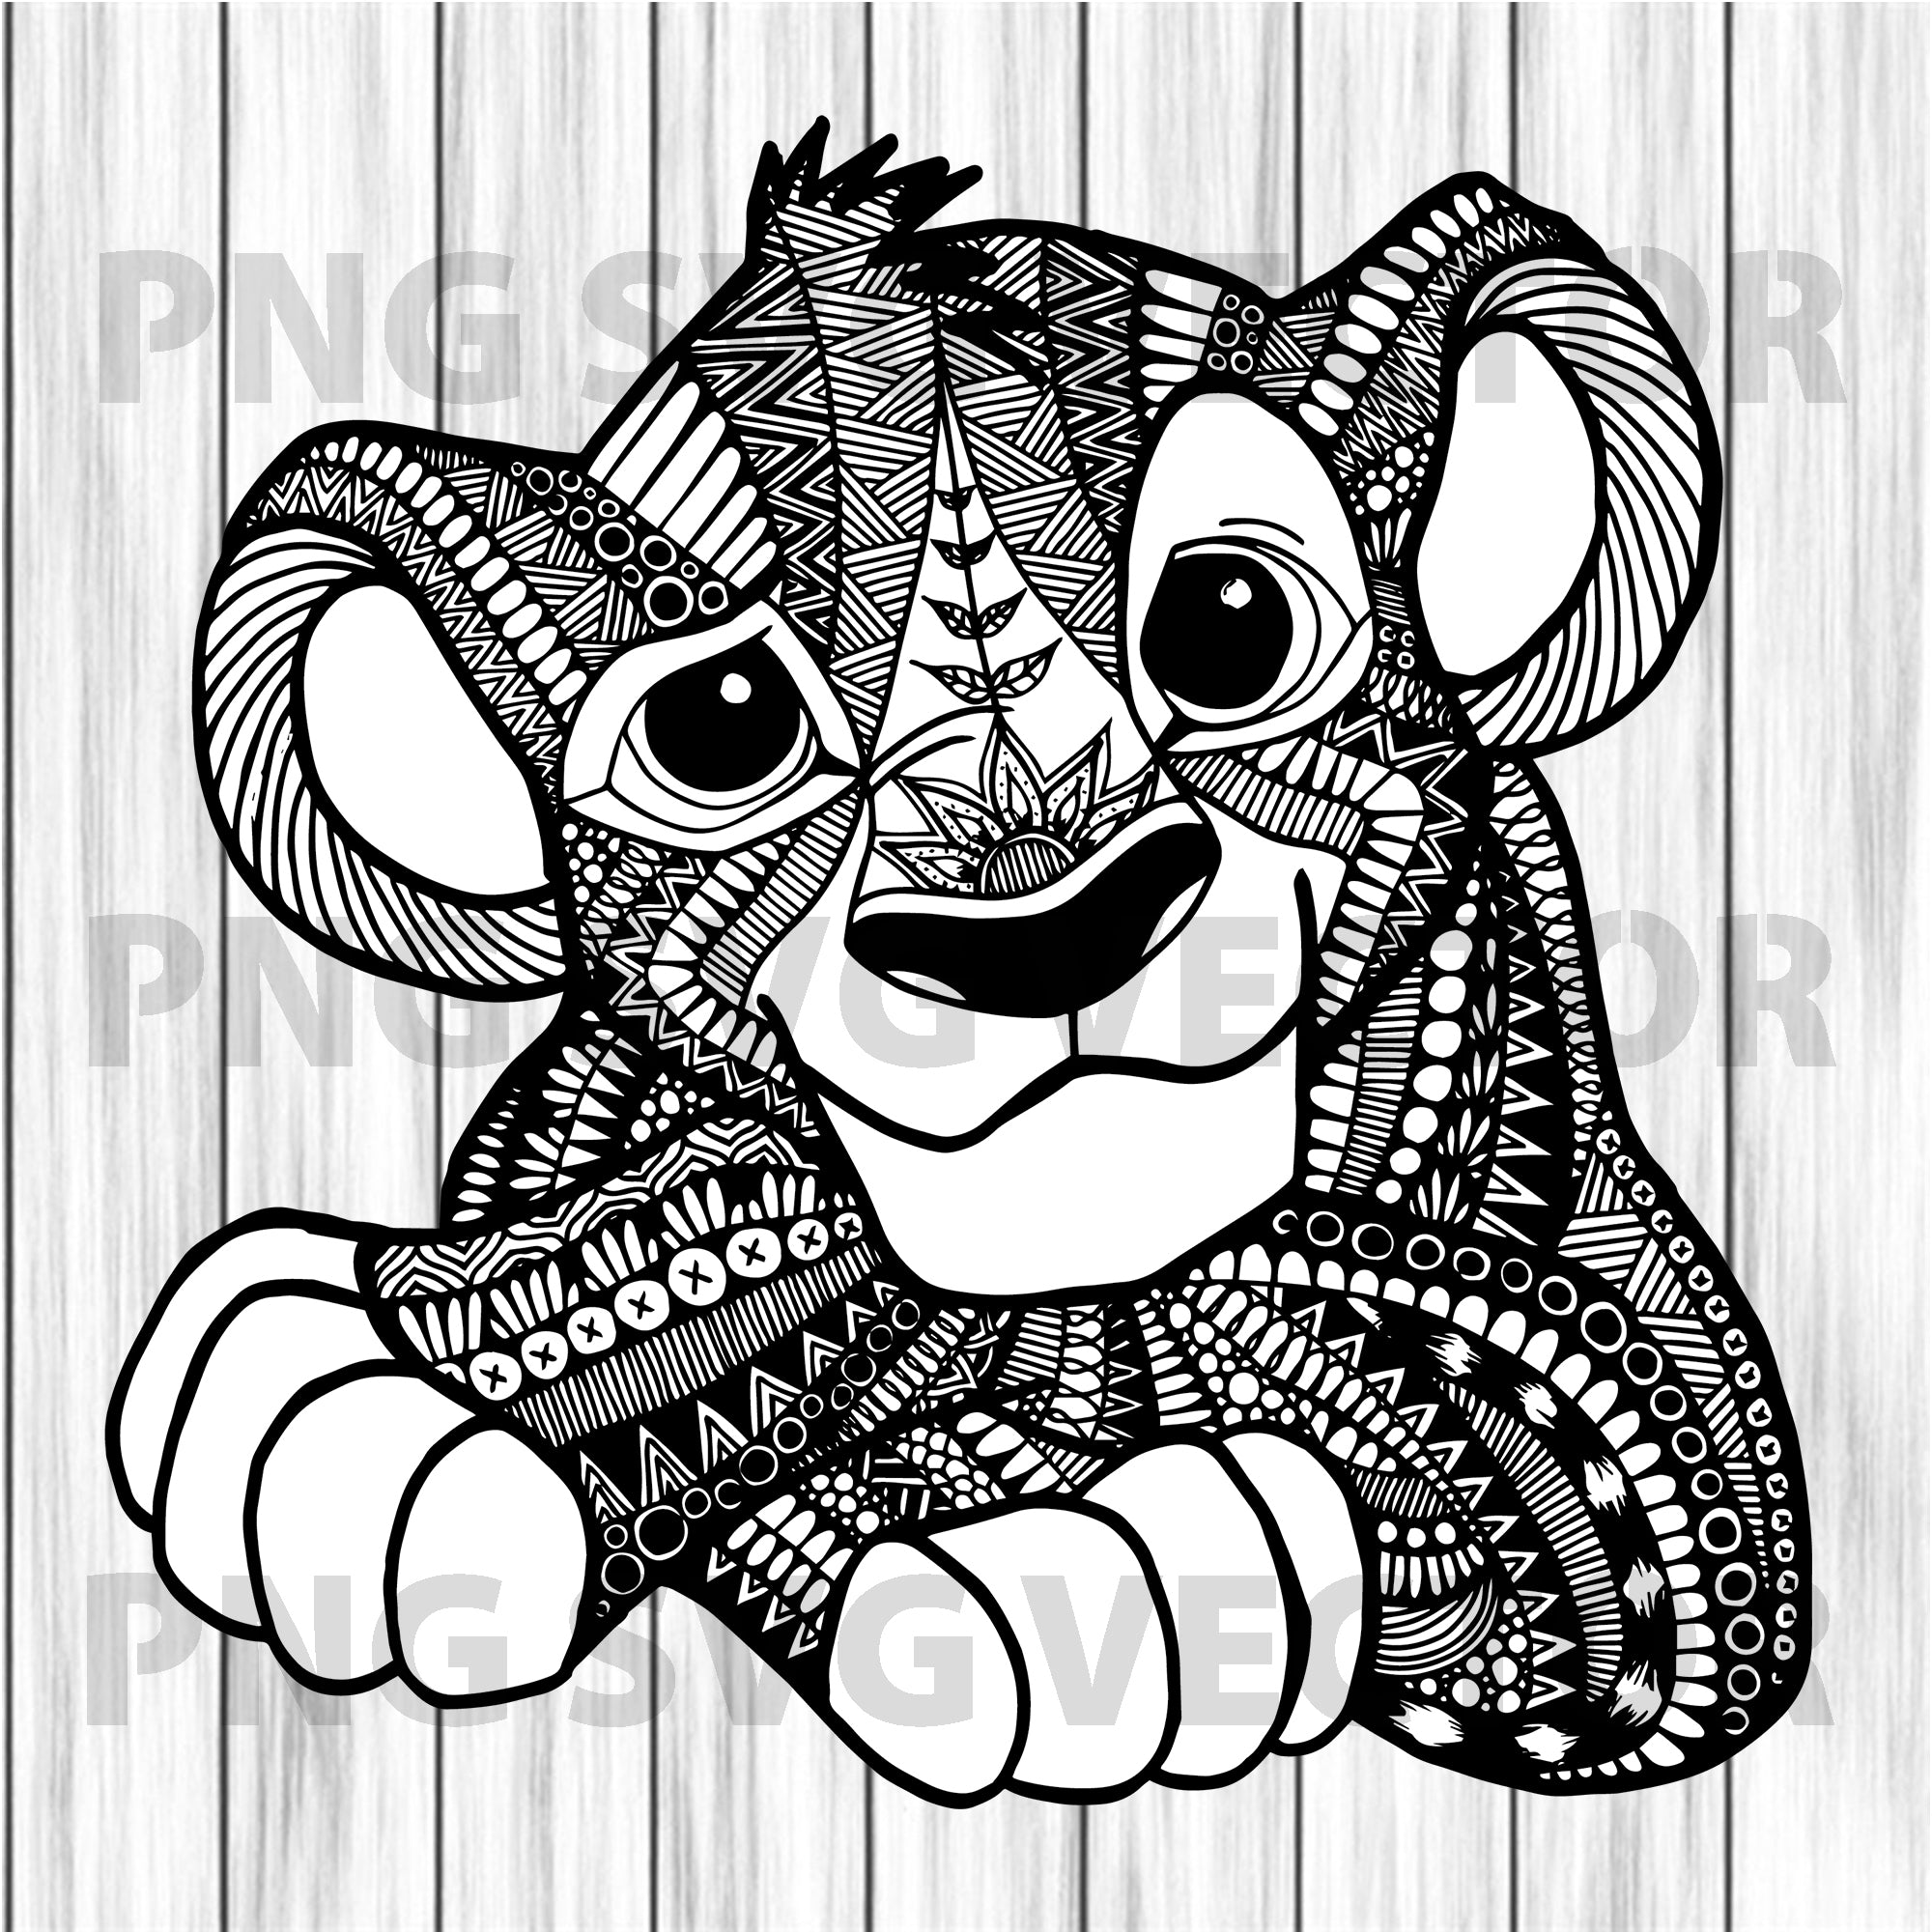 Download Mandala Lion King High Quality Svg Cut Files Best For Unique Craft Beetanosvg Scalable Vector Graphics